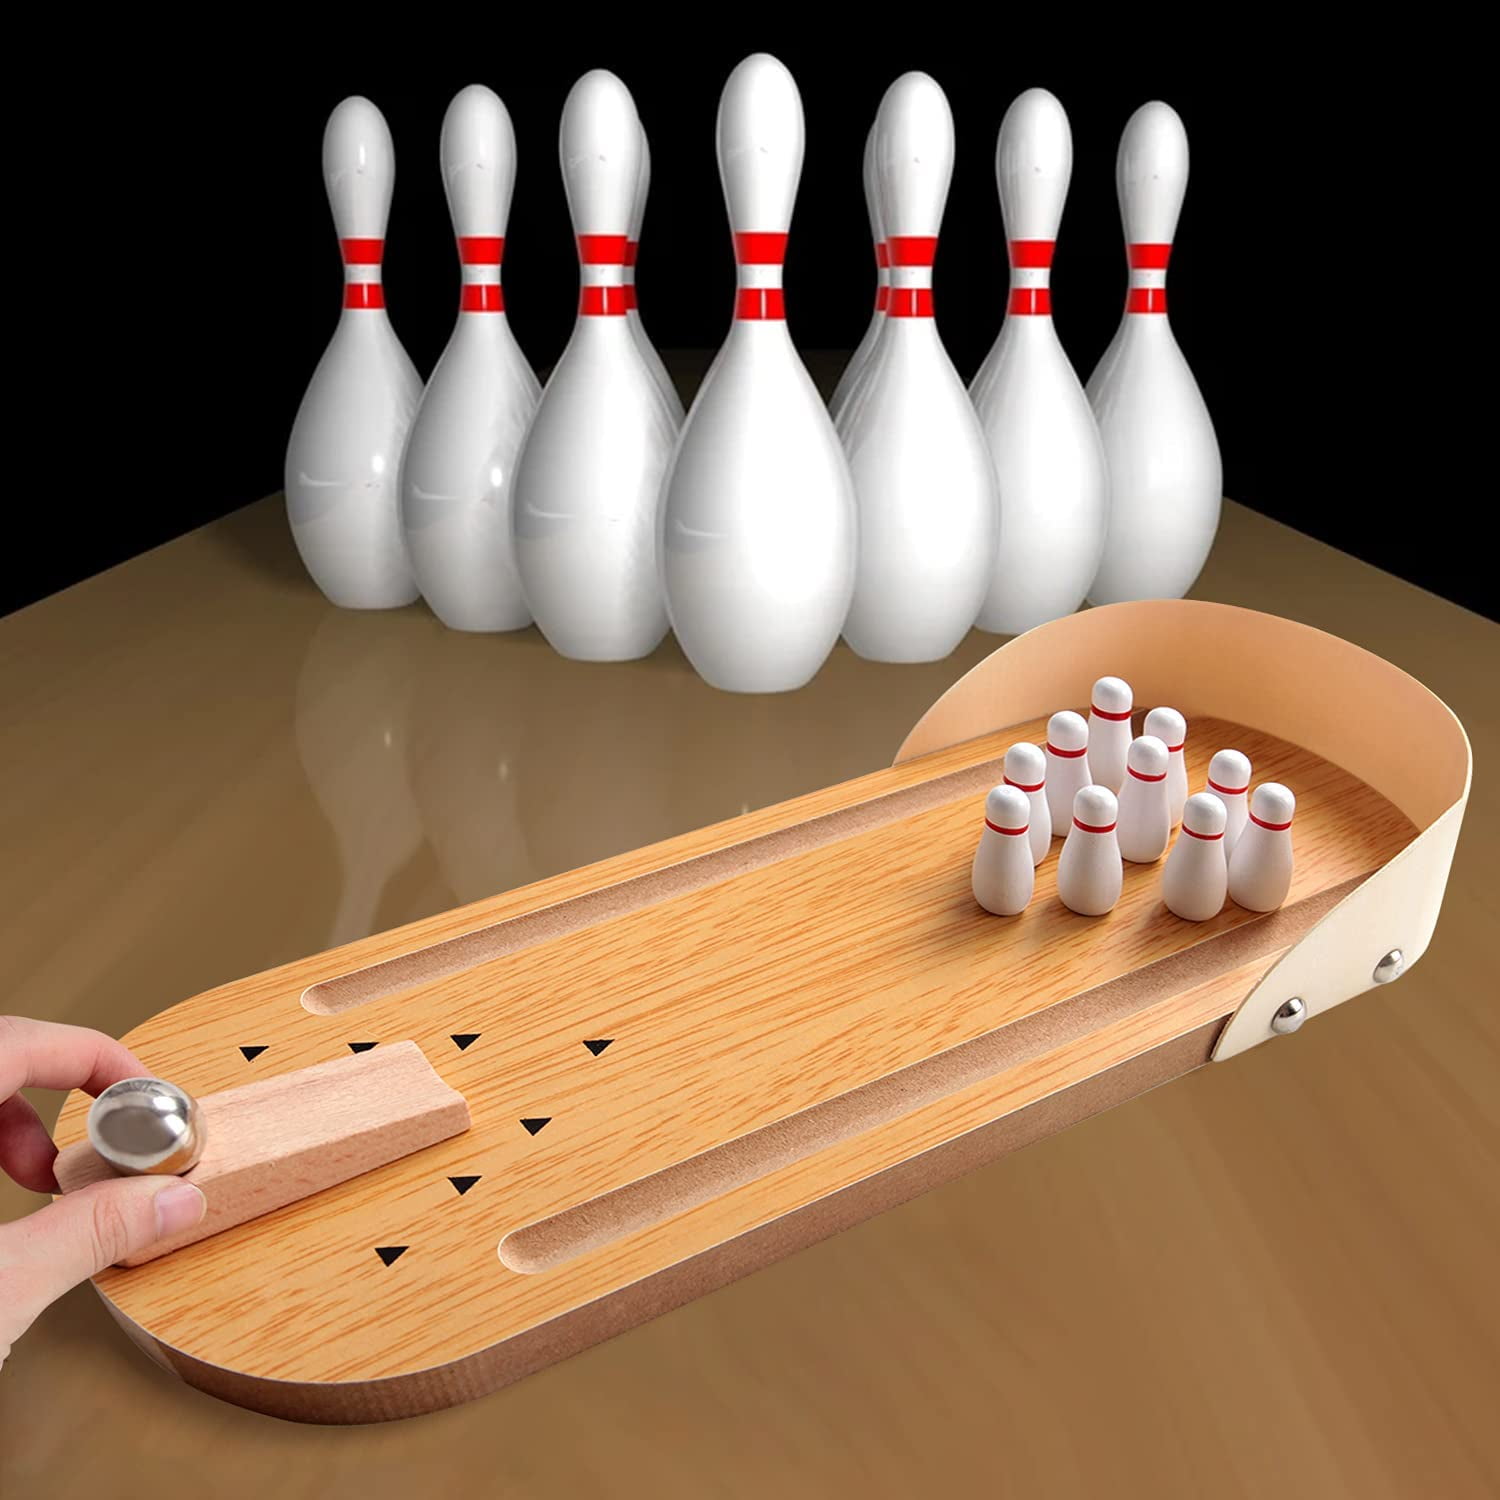 Herrnalise Tabletop Bowling Game for Kids, Adults & Family. Fun